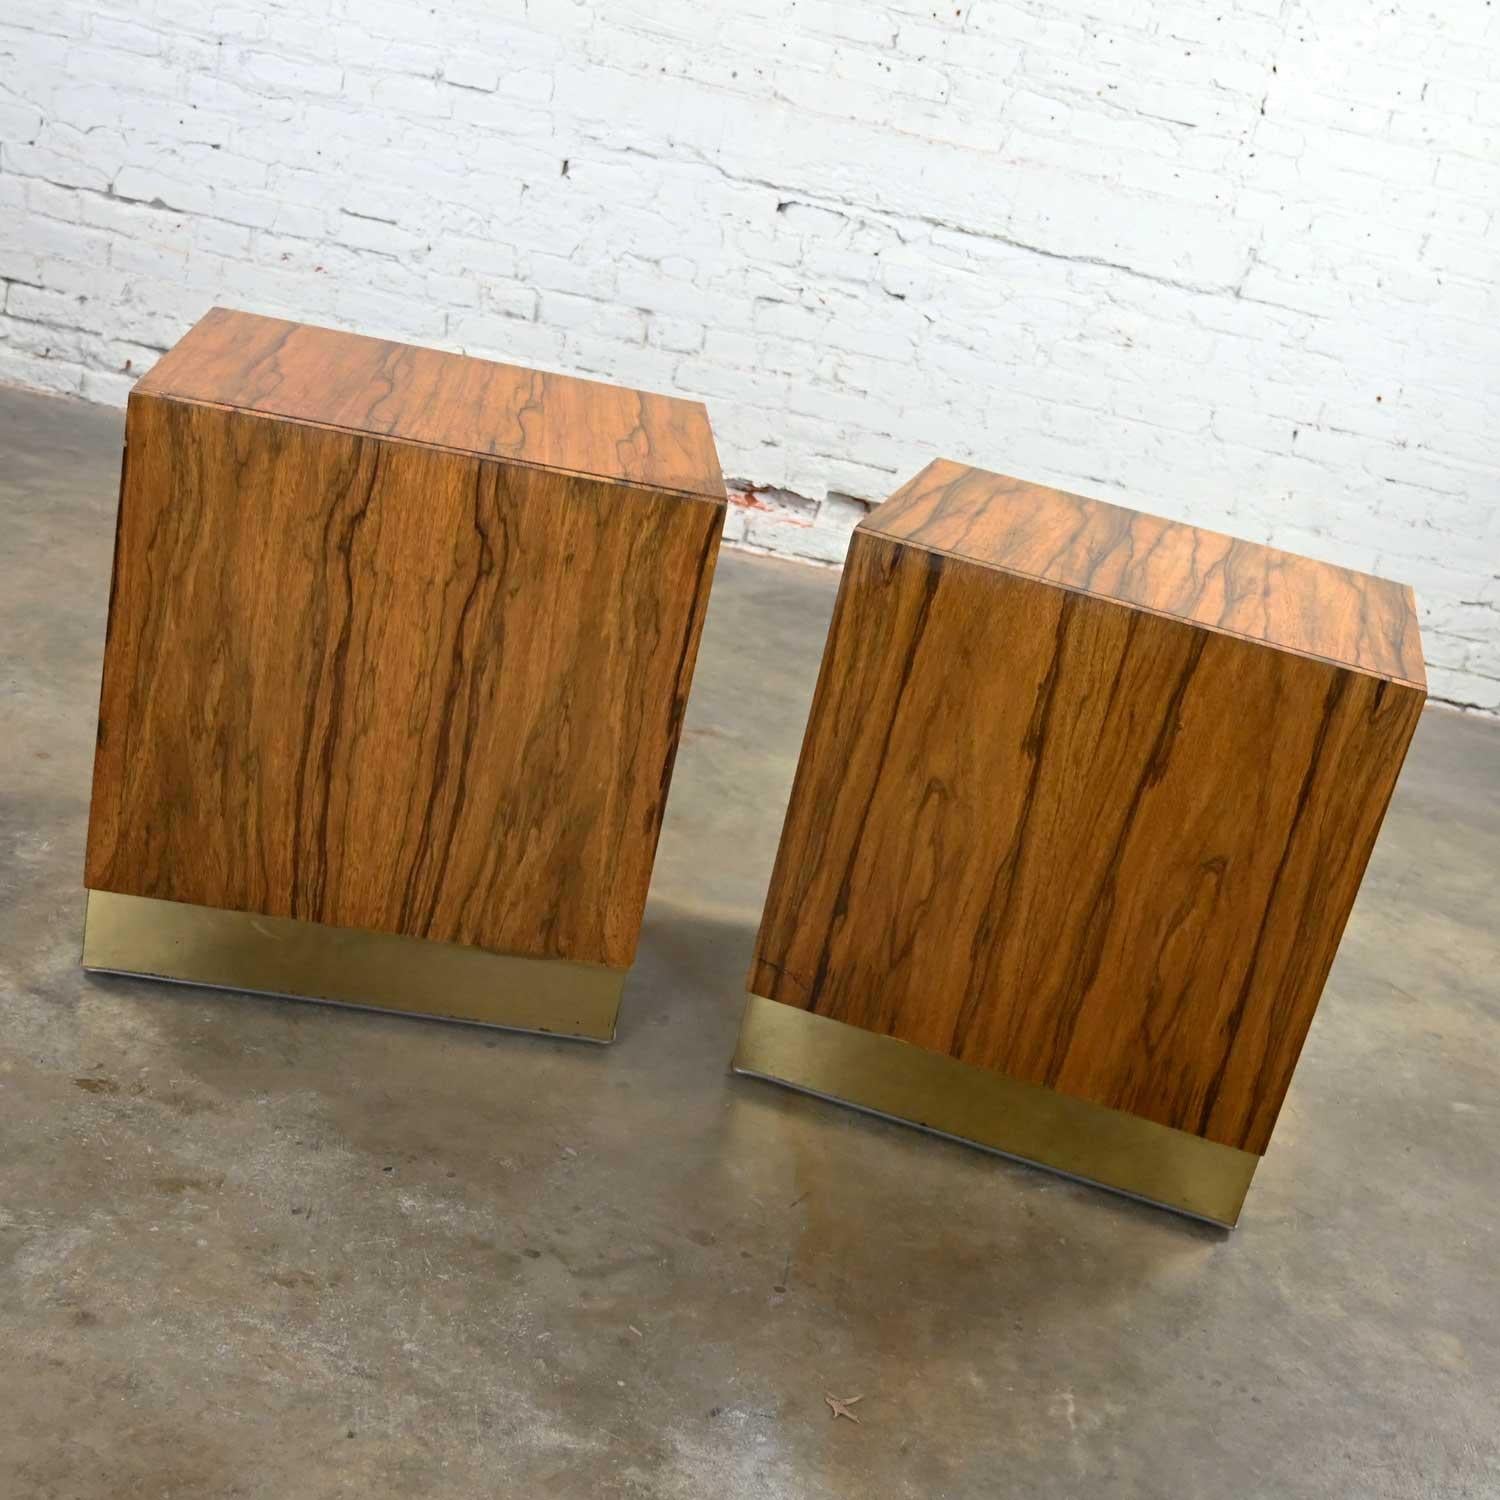 Gorgeous vintage modern rosewood pair of cube shaped nightstands by Milo Baughman for Thayer Coggin. Comprised of gorgeous rosewood veneer, brass plated steel bands, and a single ebonized drawer in each nightstand. Beautiful condition, keeping in